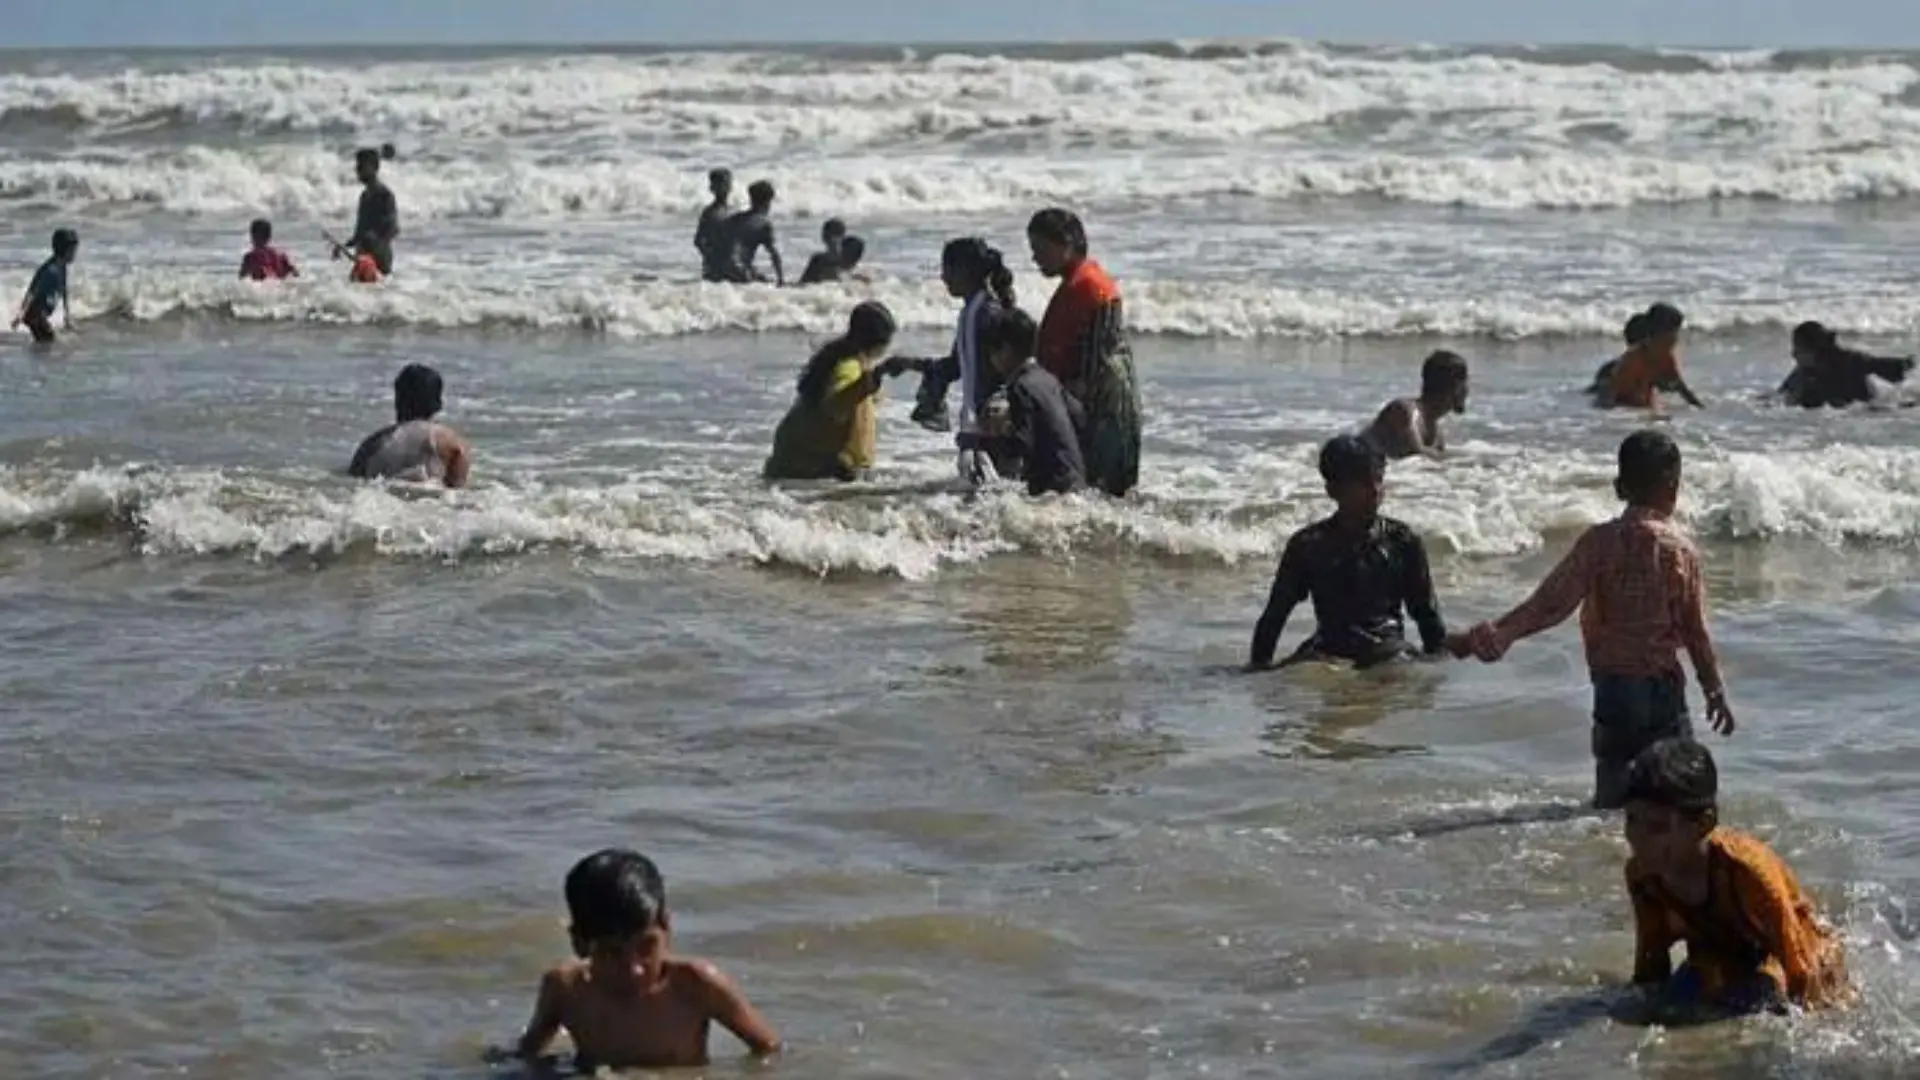 Karachi imposes month-long ban on sea swimming due to dangerous conditions